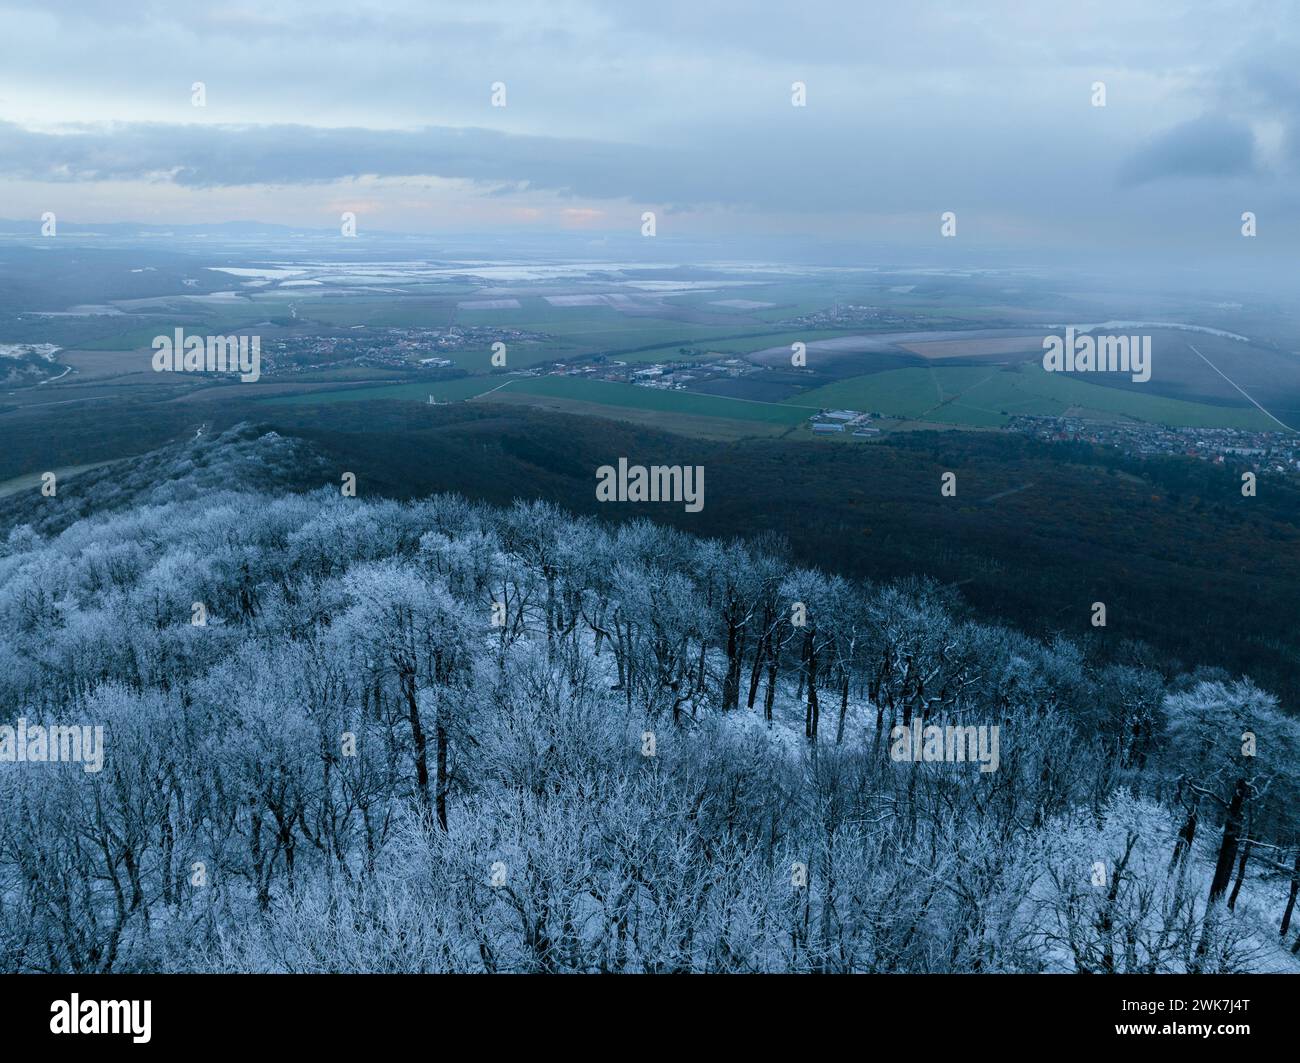 Aerial view of winter forest with frost or freeze line. Freezing on hills. Drone view of snowy landscape. Stock Photo